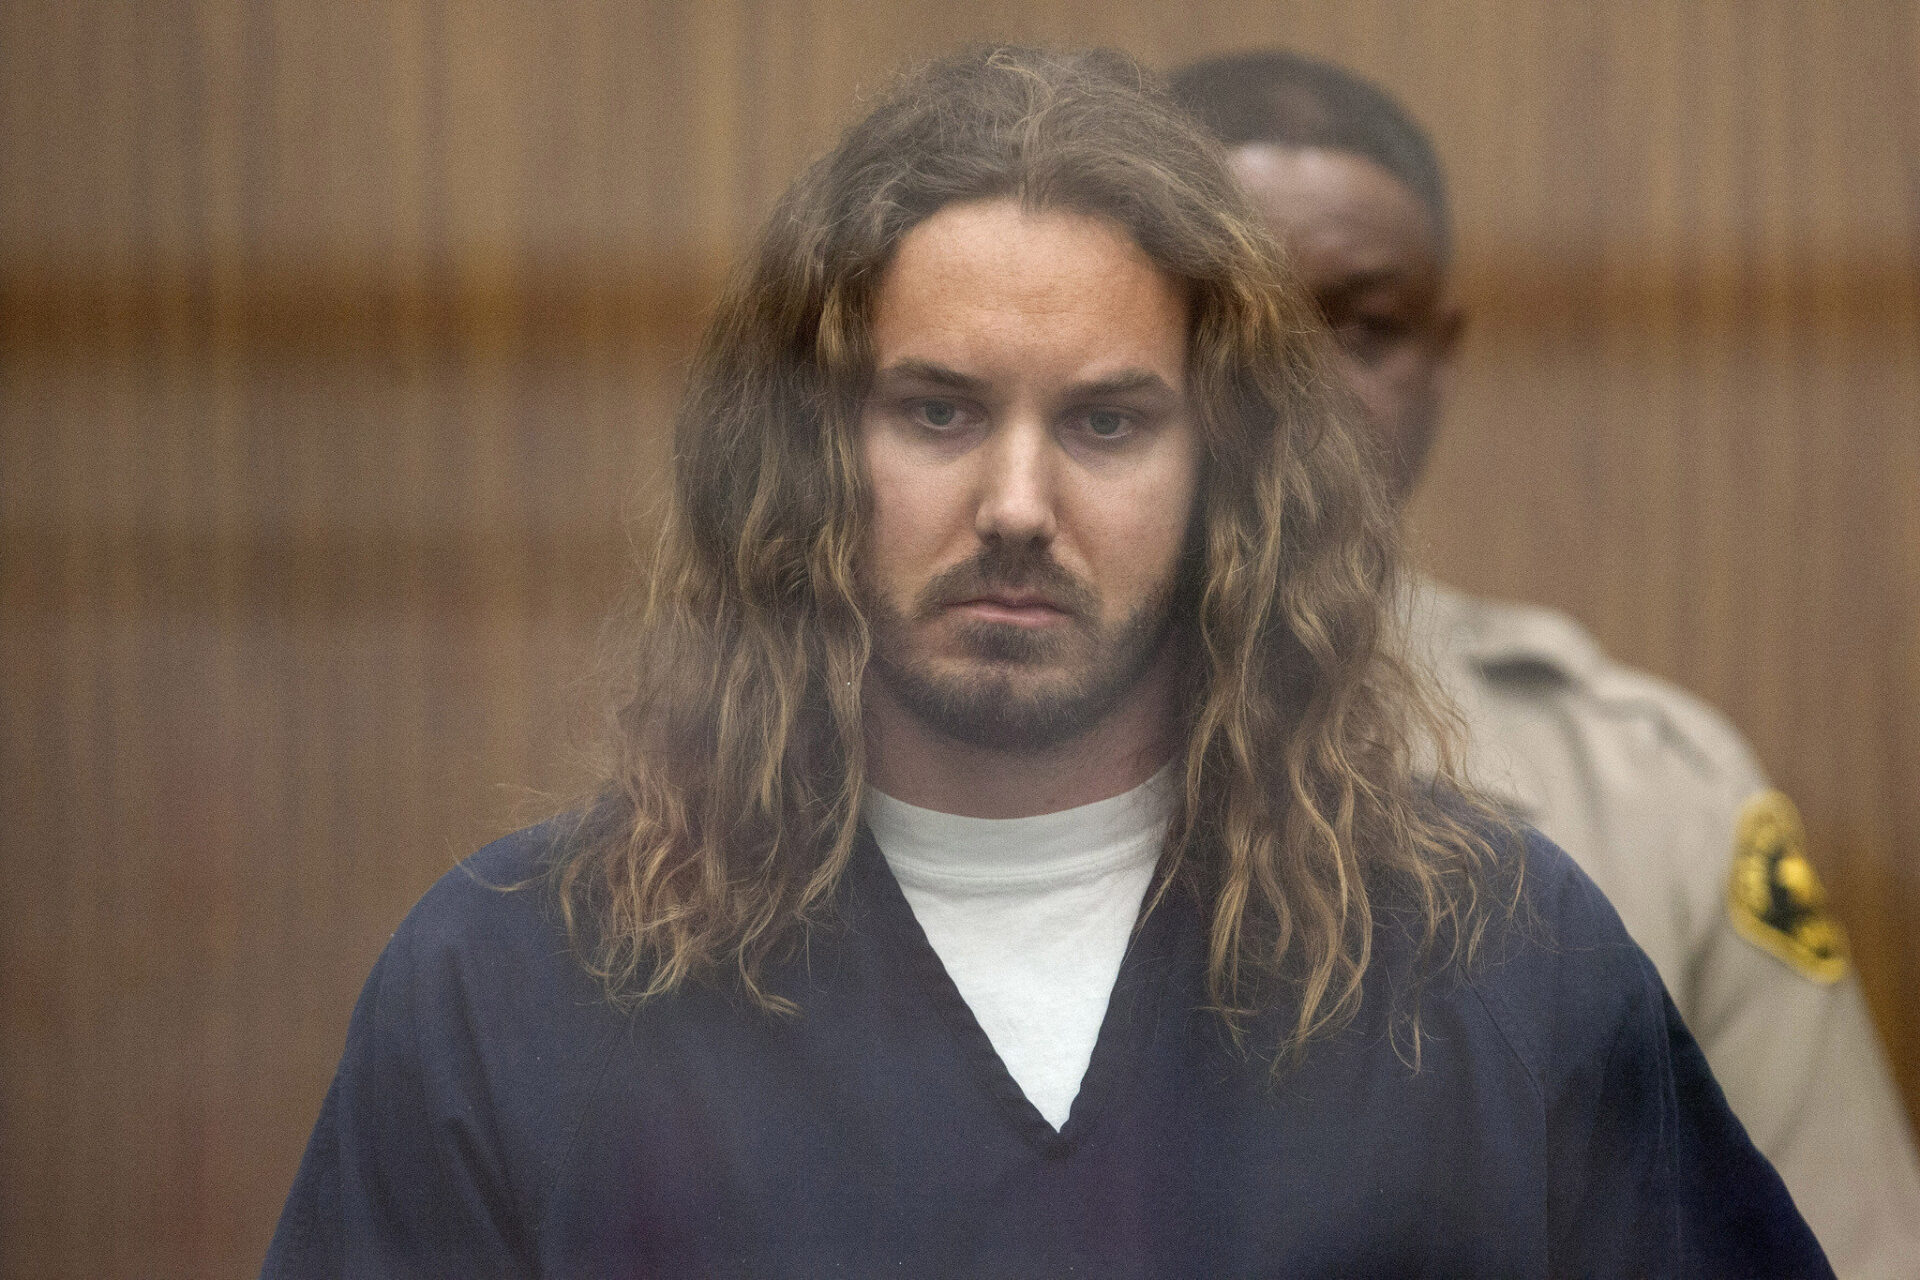 Tim Lambesis, convicted felon and former(?) metal vocalist, breaks silence